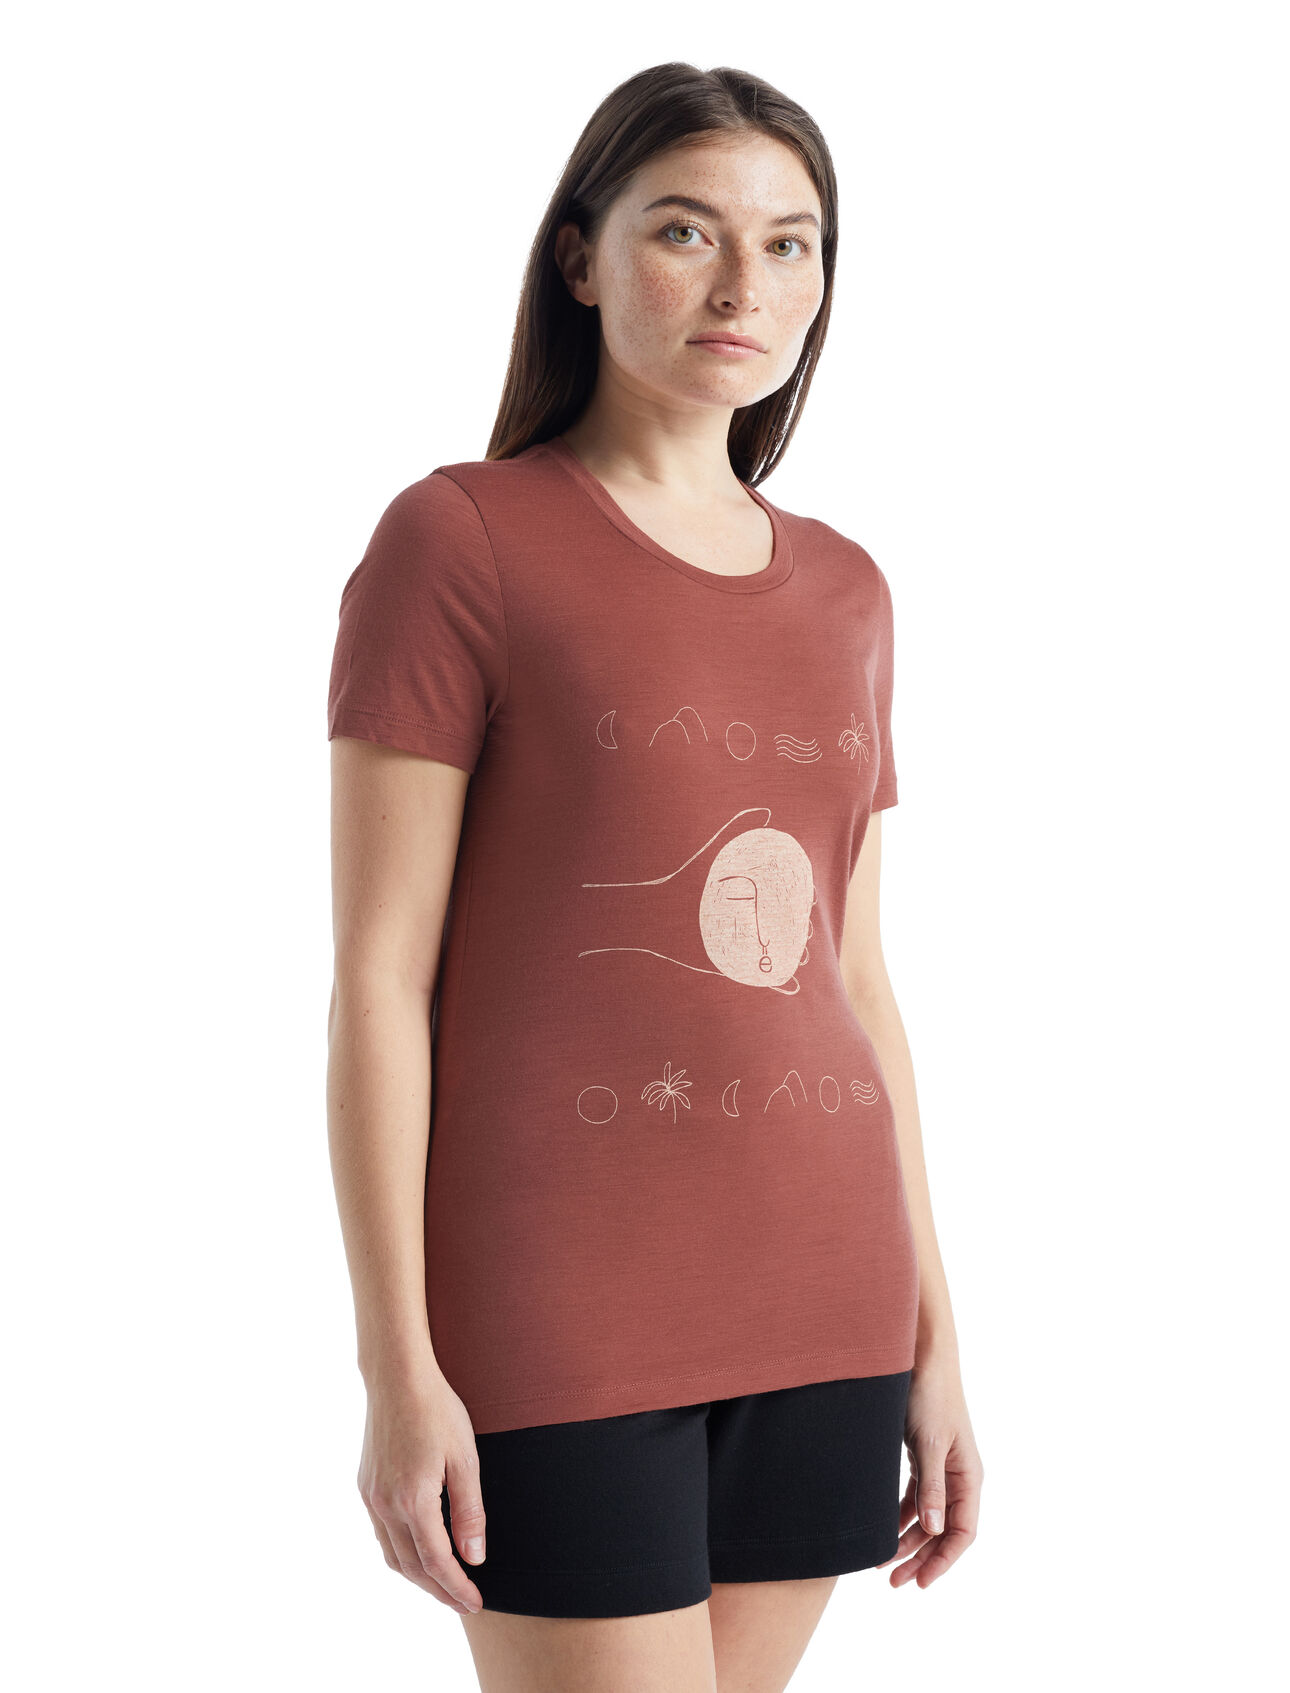 Womens Merino Tech Lite II Short Sleeve T-Shirt Moon Sonnet Our versatile Tech Tee that provides comfort, breathability and odor-resistance for any adventure you can think of, the Tech Lite II Short Sleeve Tee Moon Sonnet features 100% merino for all-natural performance. The original artwork by Araki Koman draws inspiration from the moon cycles and their effect on plants, tides and humans.